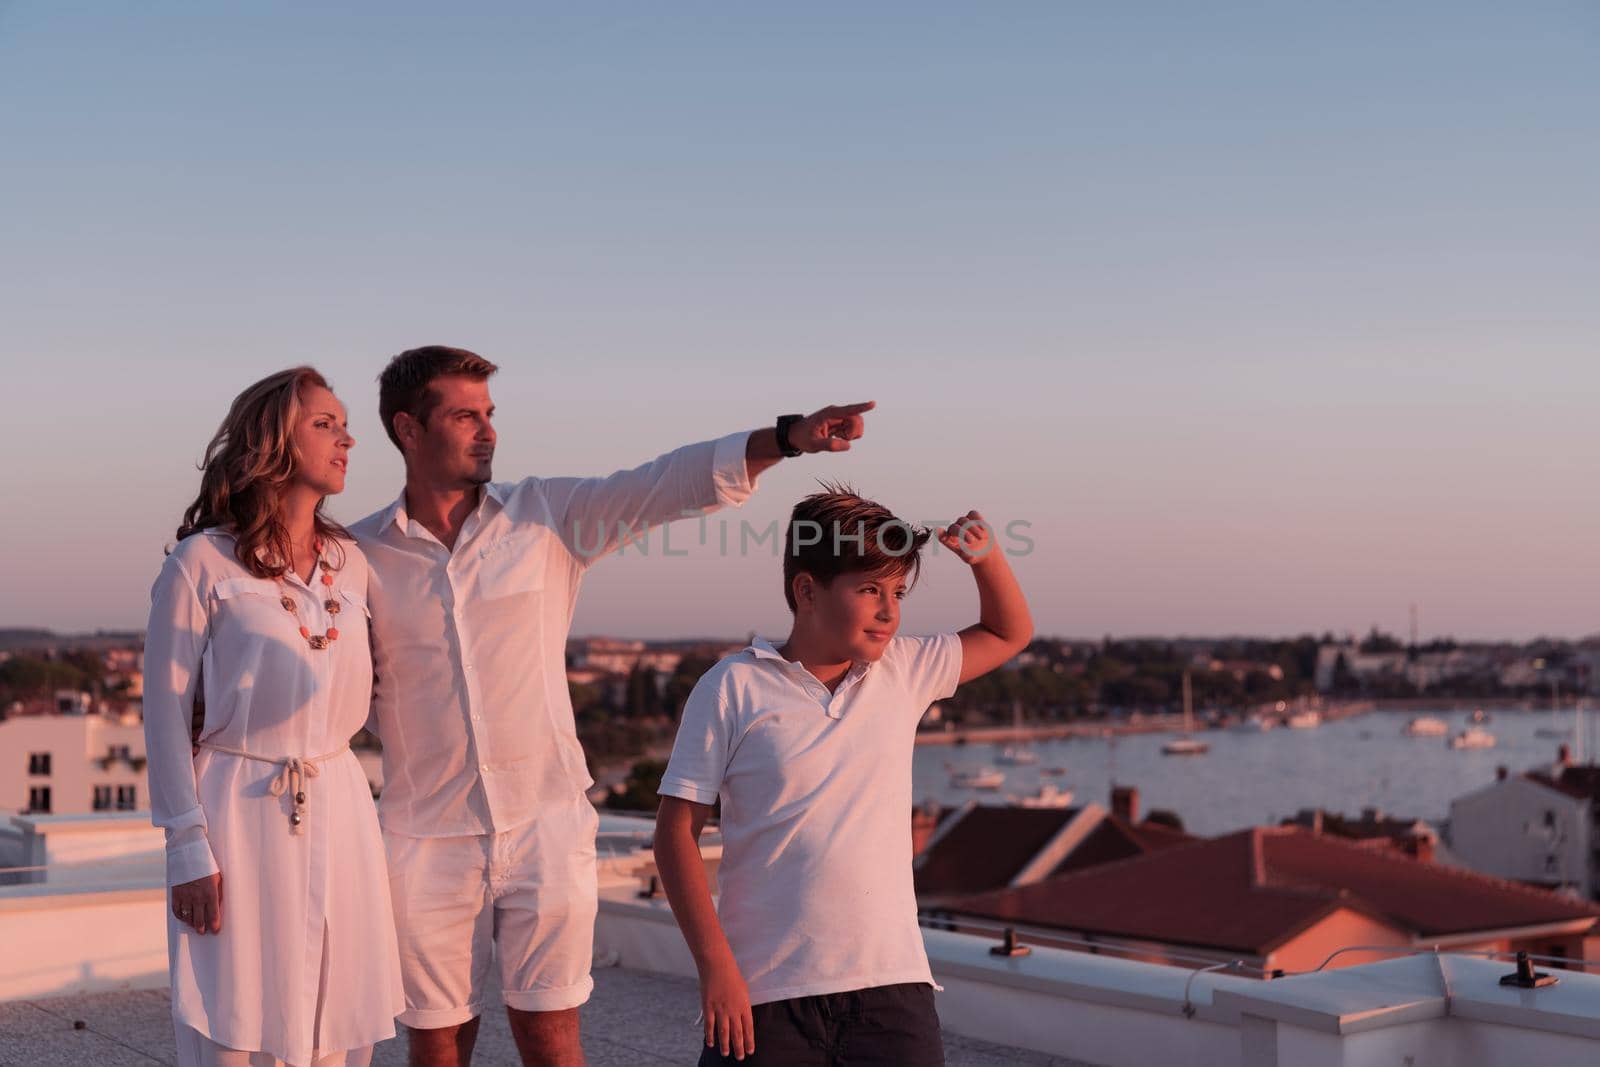 The happy family enjoys and spends time together on the roof of the house while watching the sunset on the open sea together. High-quality photo